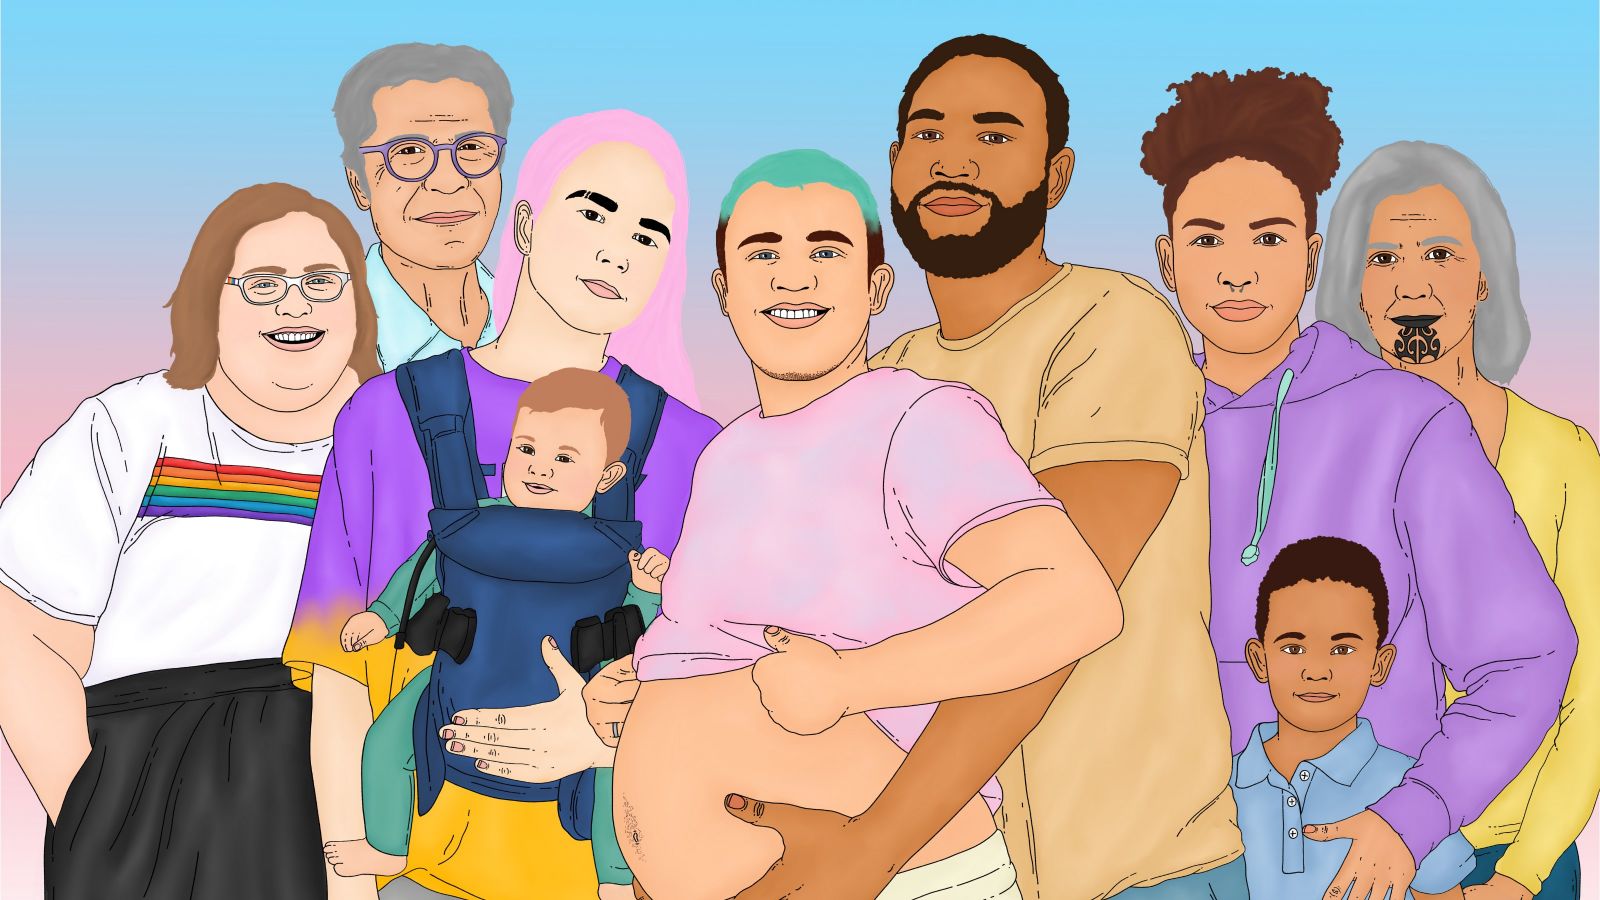 graphic representation of pregnant non-gendered person and their family, including young children and visibly maori people